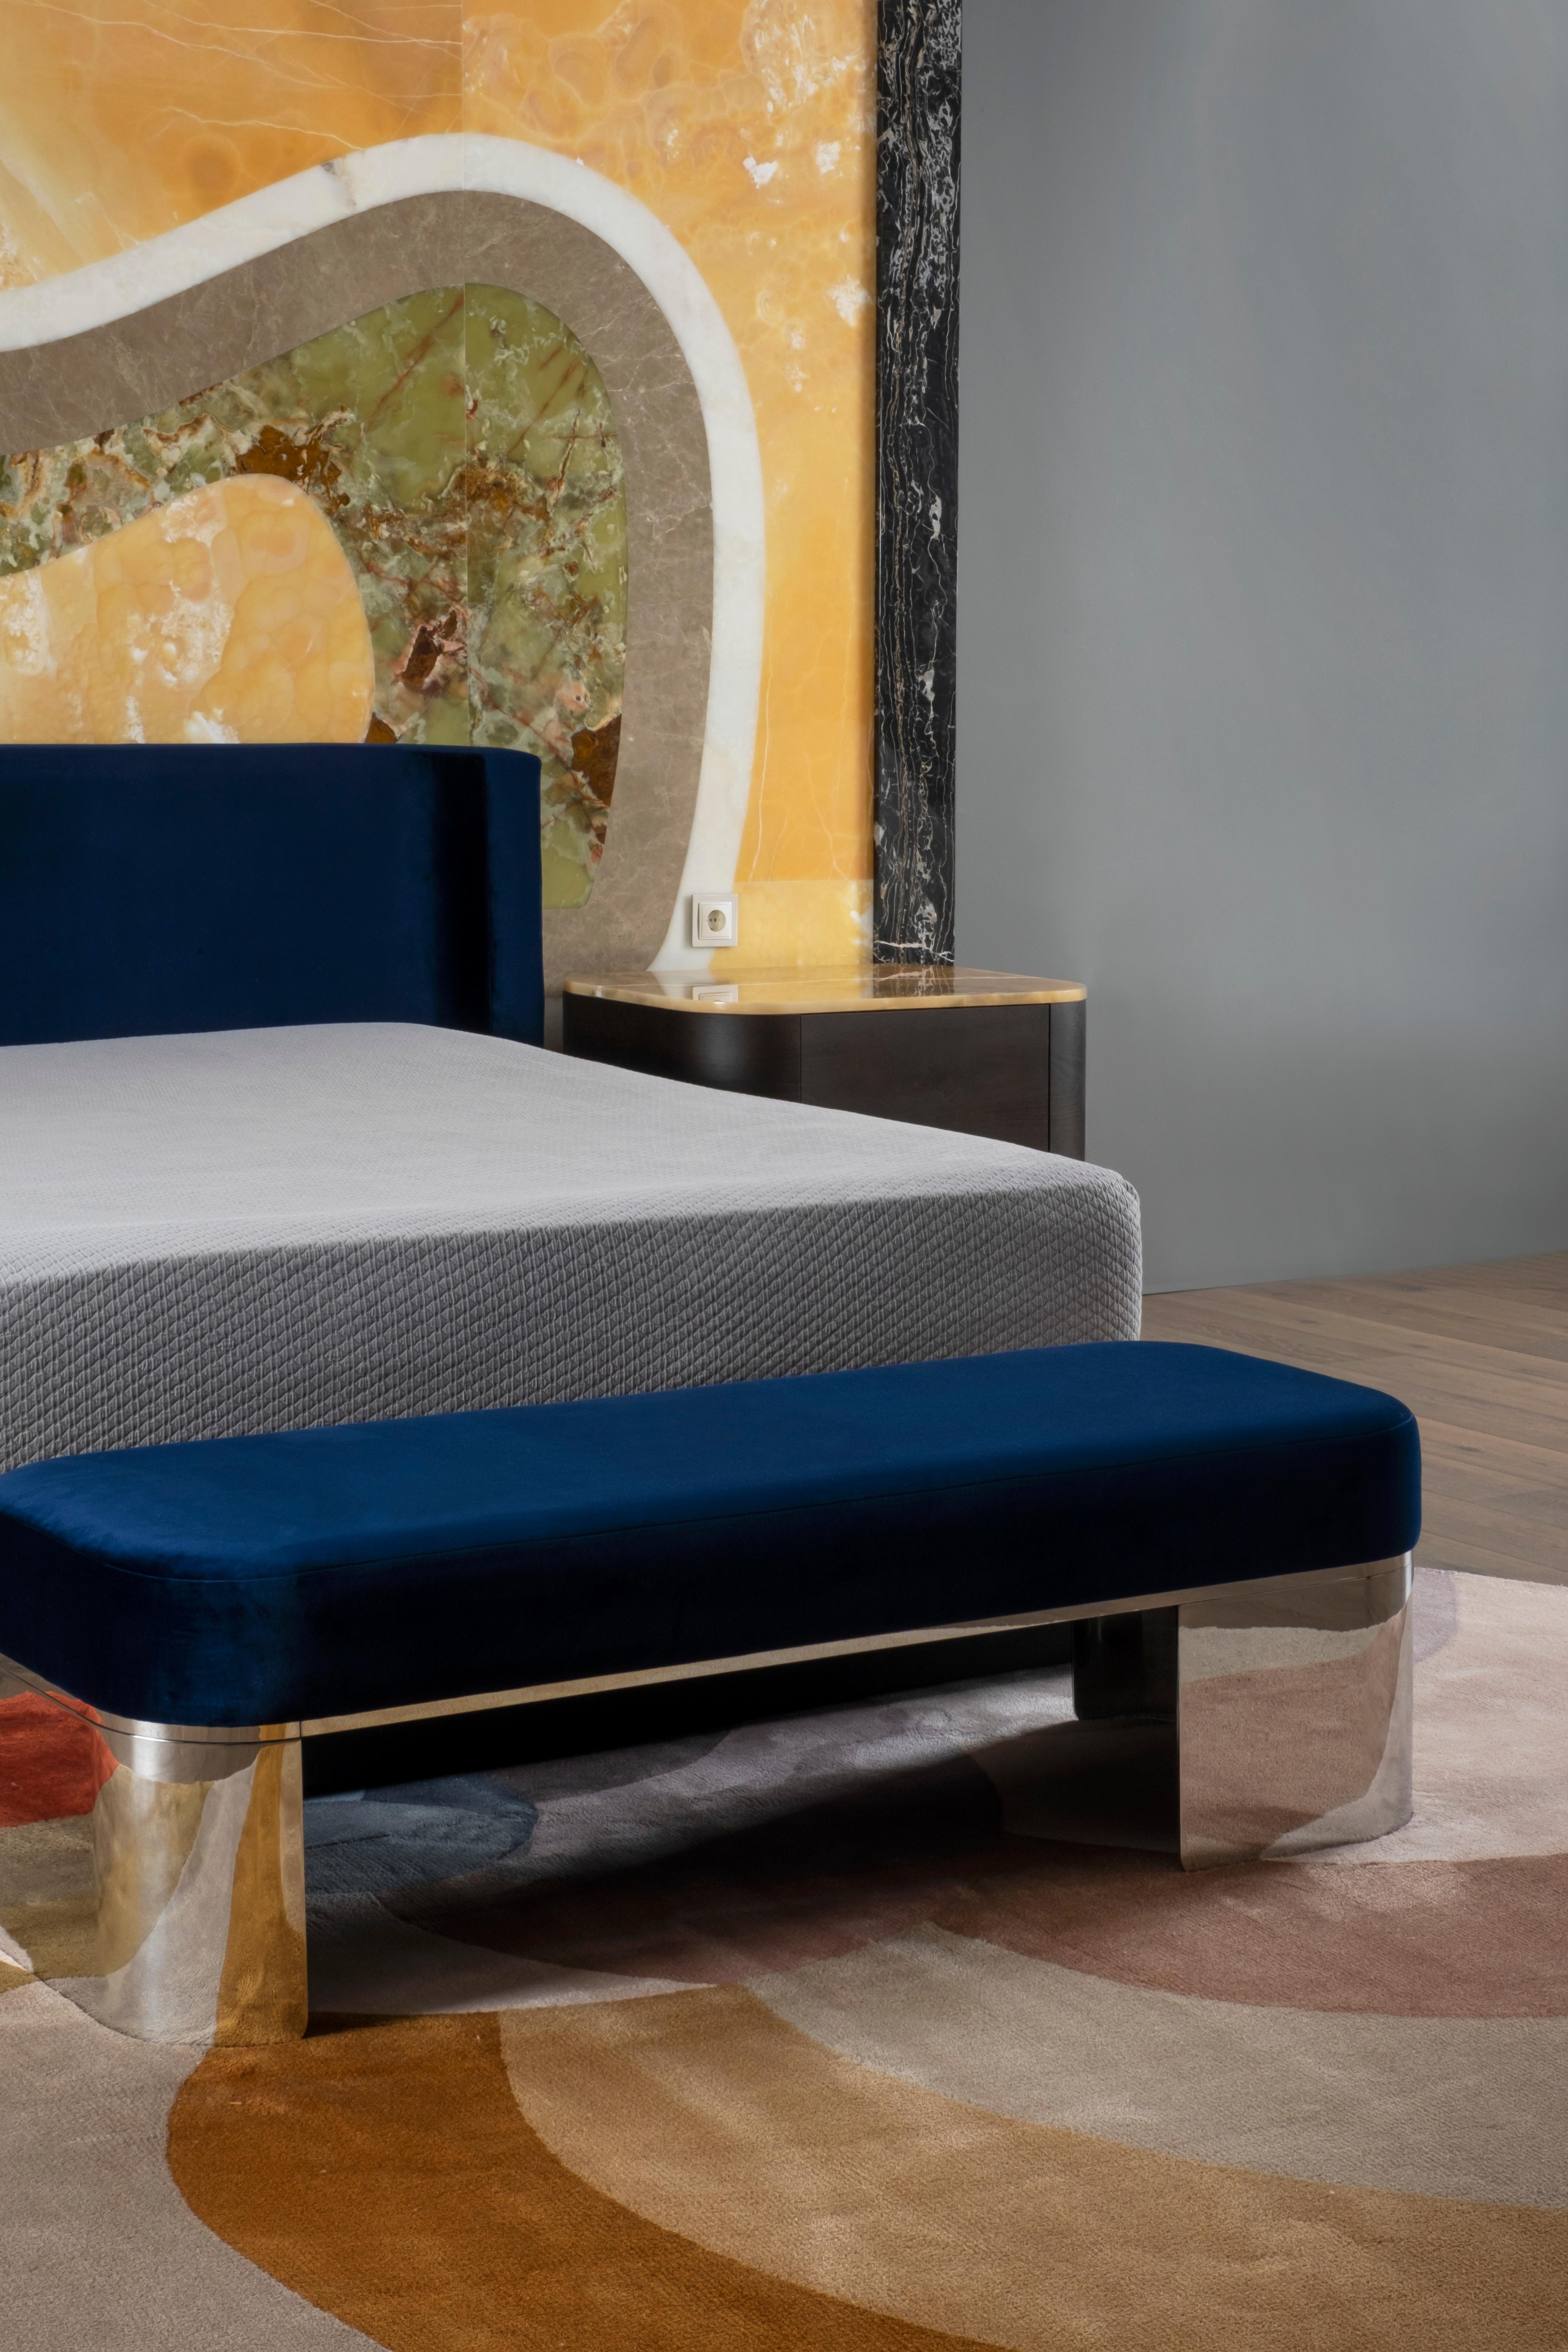 Abadia Bed Stool, Contemporary Collection, Handcrafted in Portugal - Europe by Greenapple.

The perfect complement for your bedroom. Abadia bed stool offers simplicity and comfort for relaxed moments, without forgetting that the small details make